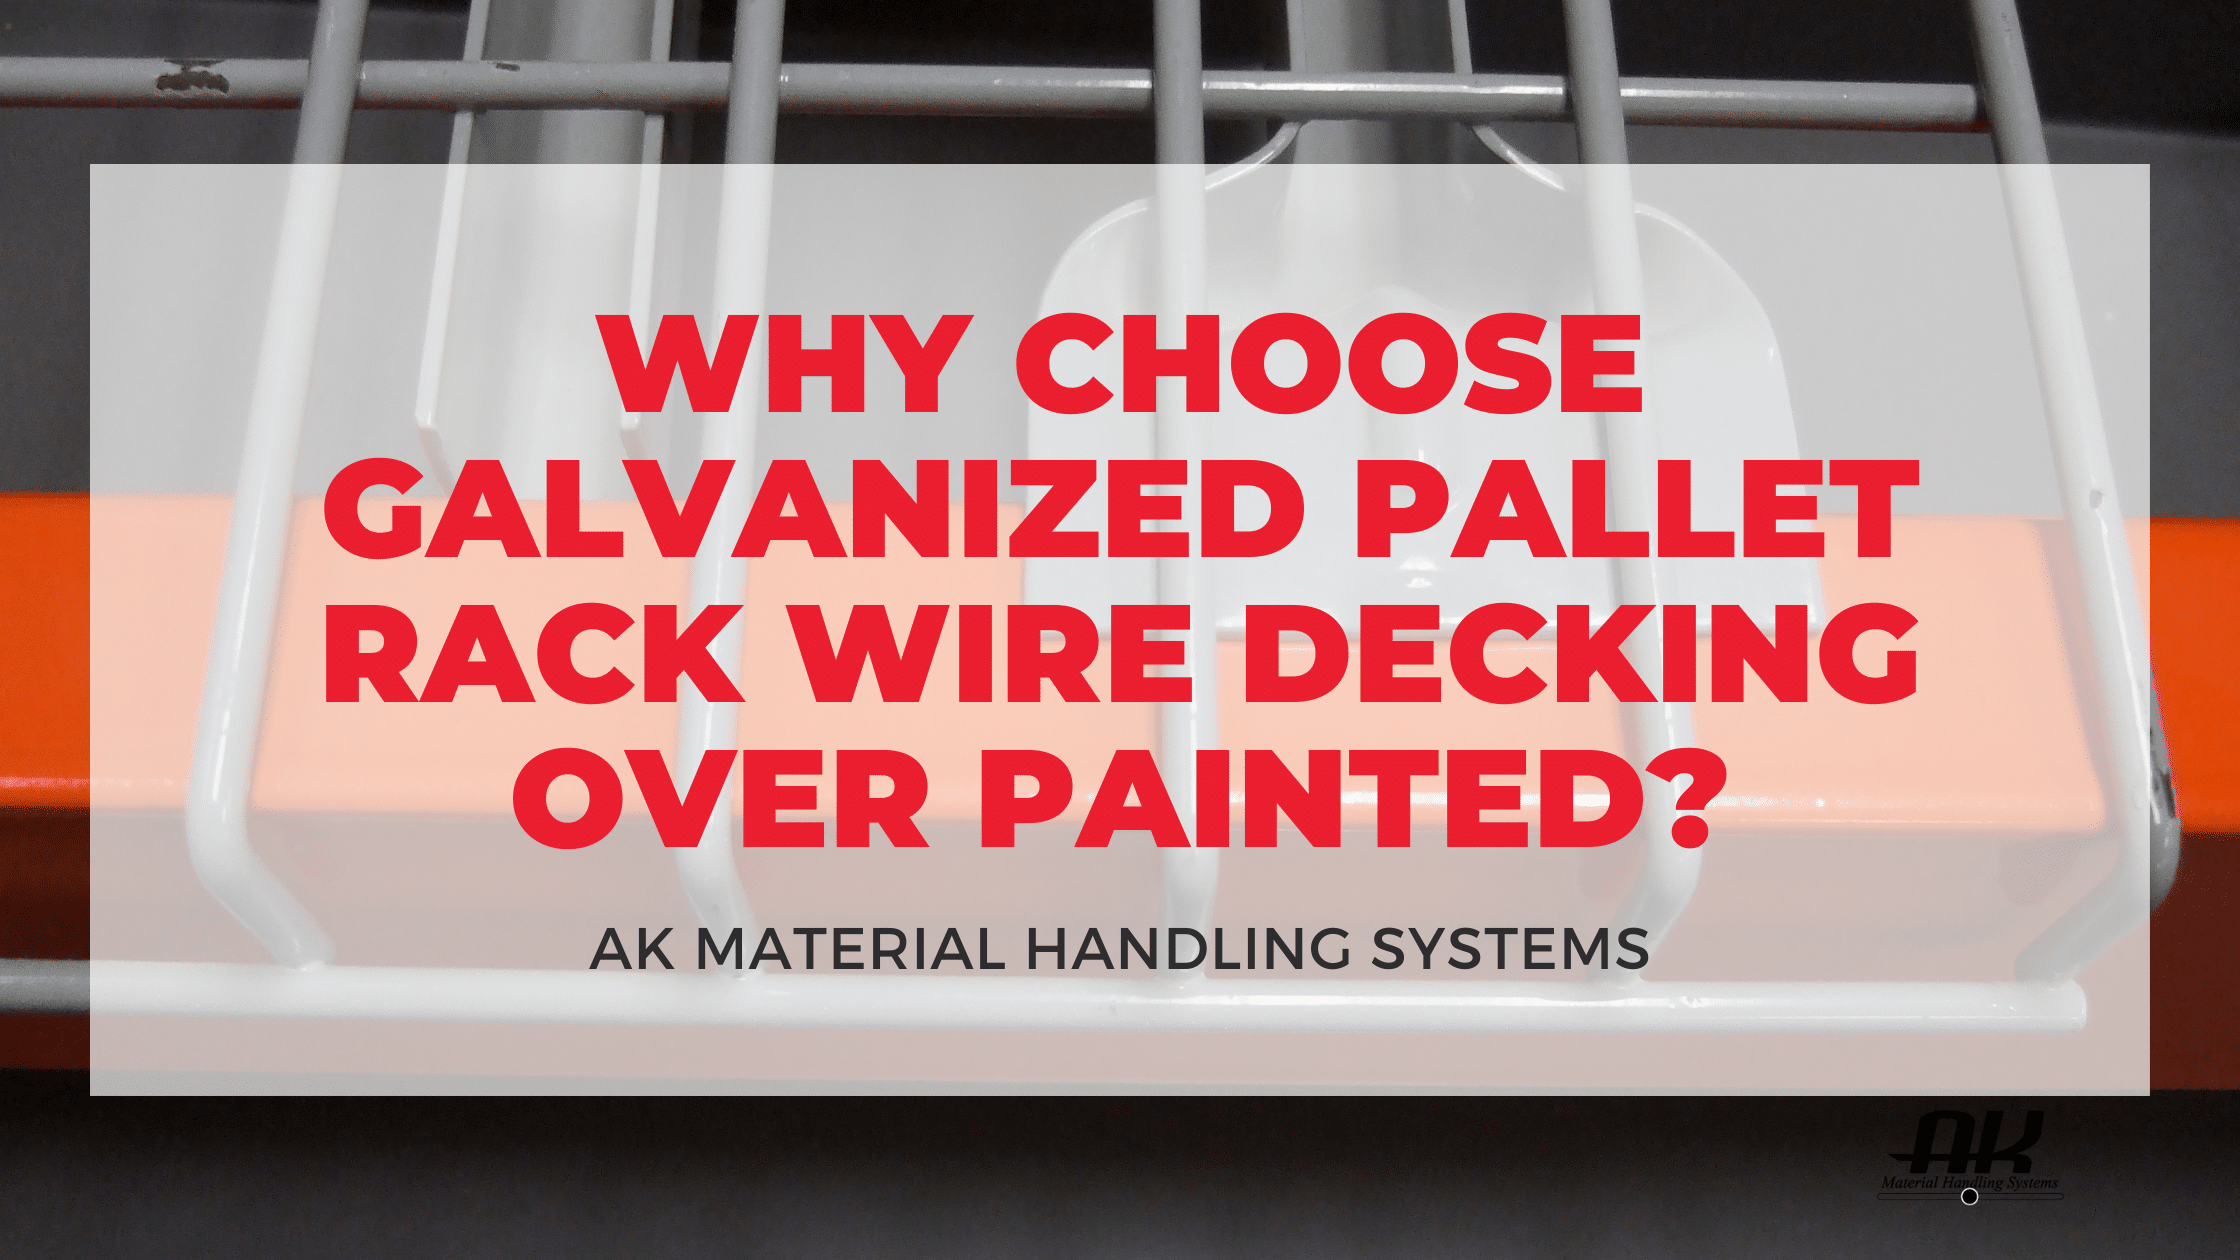 Why choose galvanized pallet rack wire decking over painted?